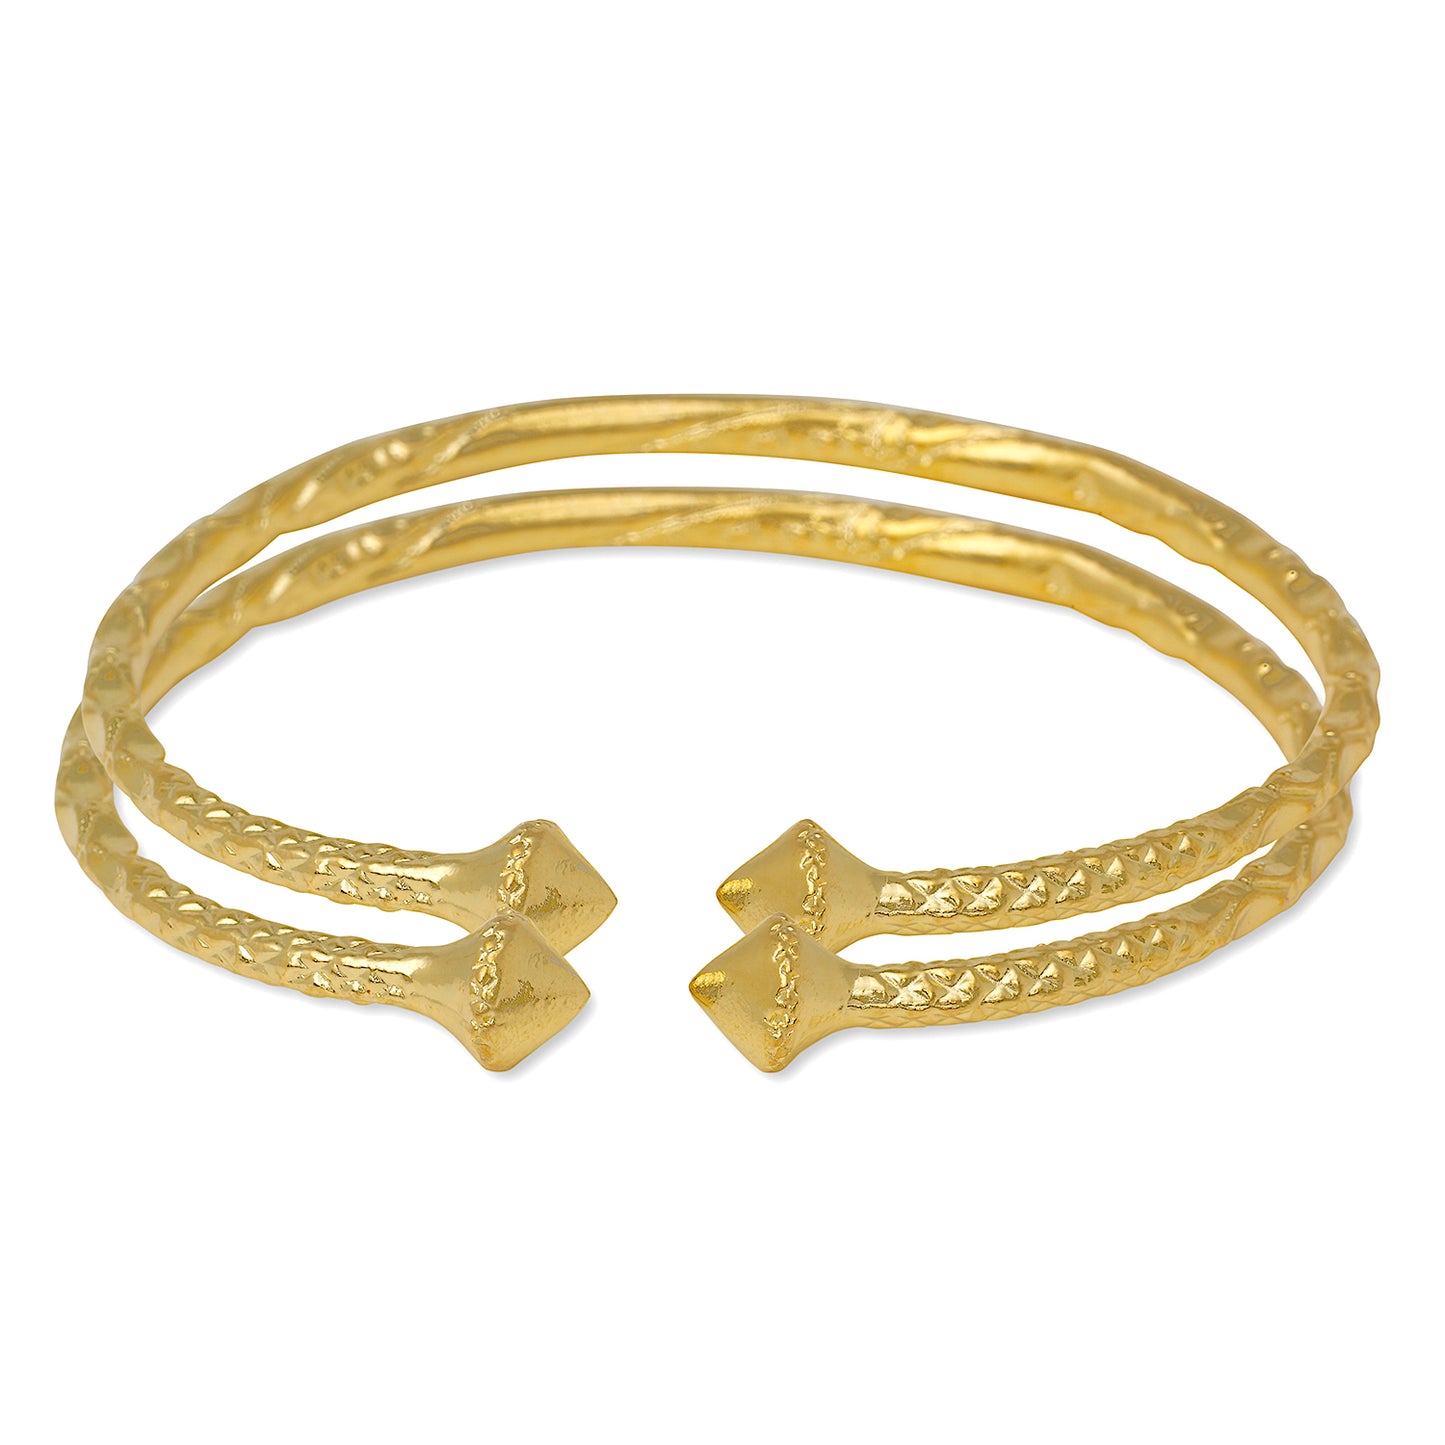 Better Jewelry Smooth Pyramid Bangles 14K Gold Plated .925 Sterling Silver Bangles, 1 pair